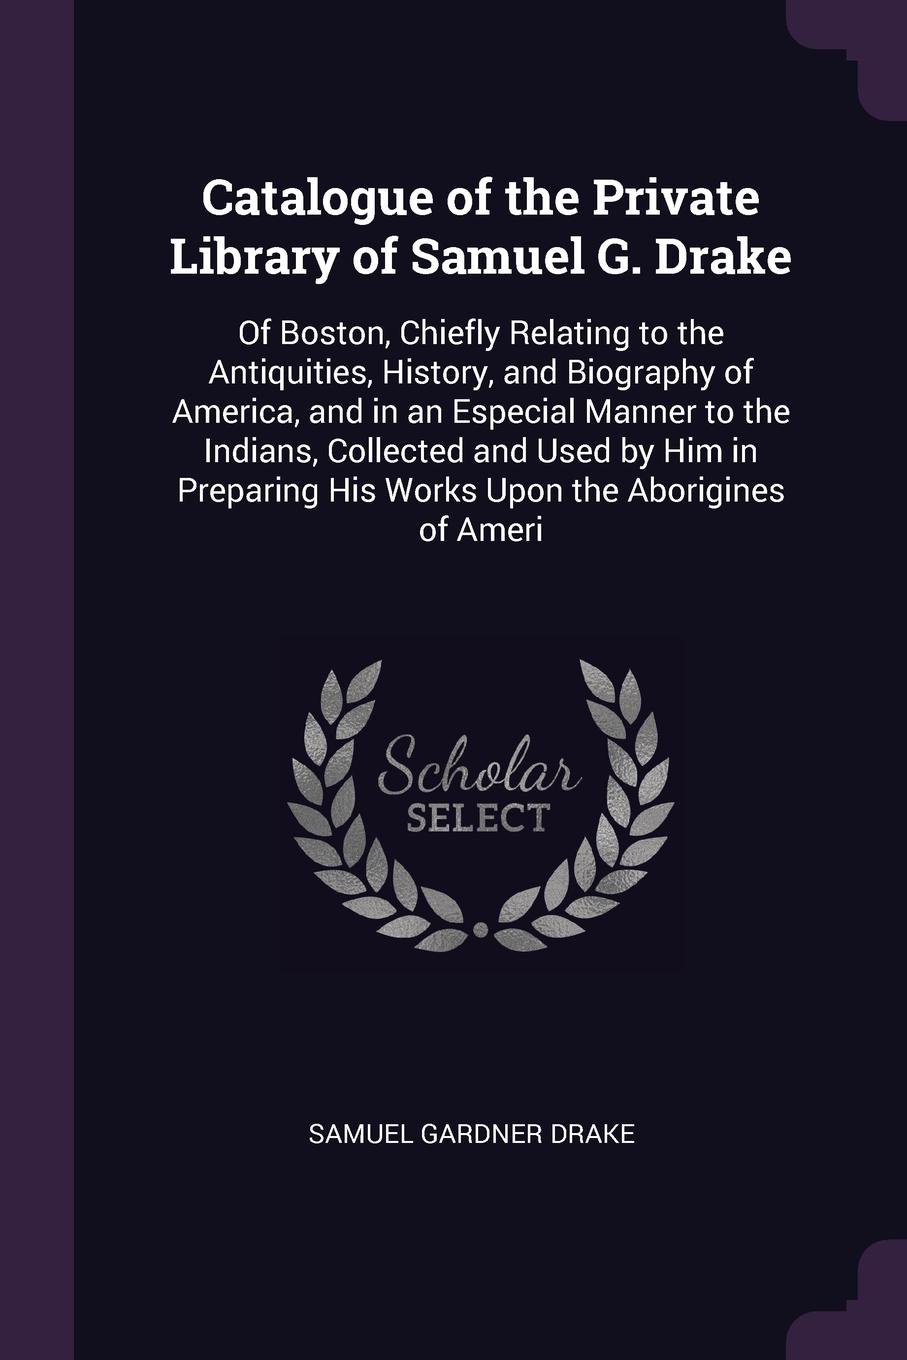 Catalogue of the Private Library of Samuel G. Drake. Of Boston, Chiefly Relating to the Antiquities, History, and Biography of America, and in an Especial Manner to the Indians, Collected and Used by Him in Preparing His Works Upon the Aborigines ...